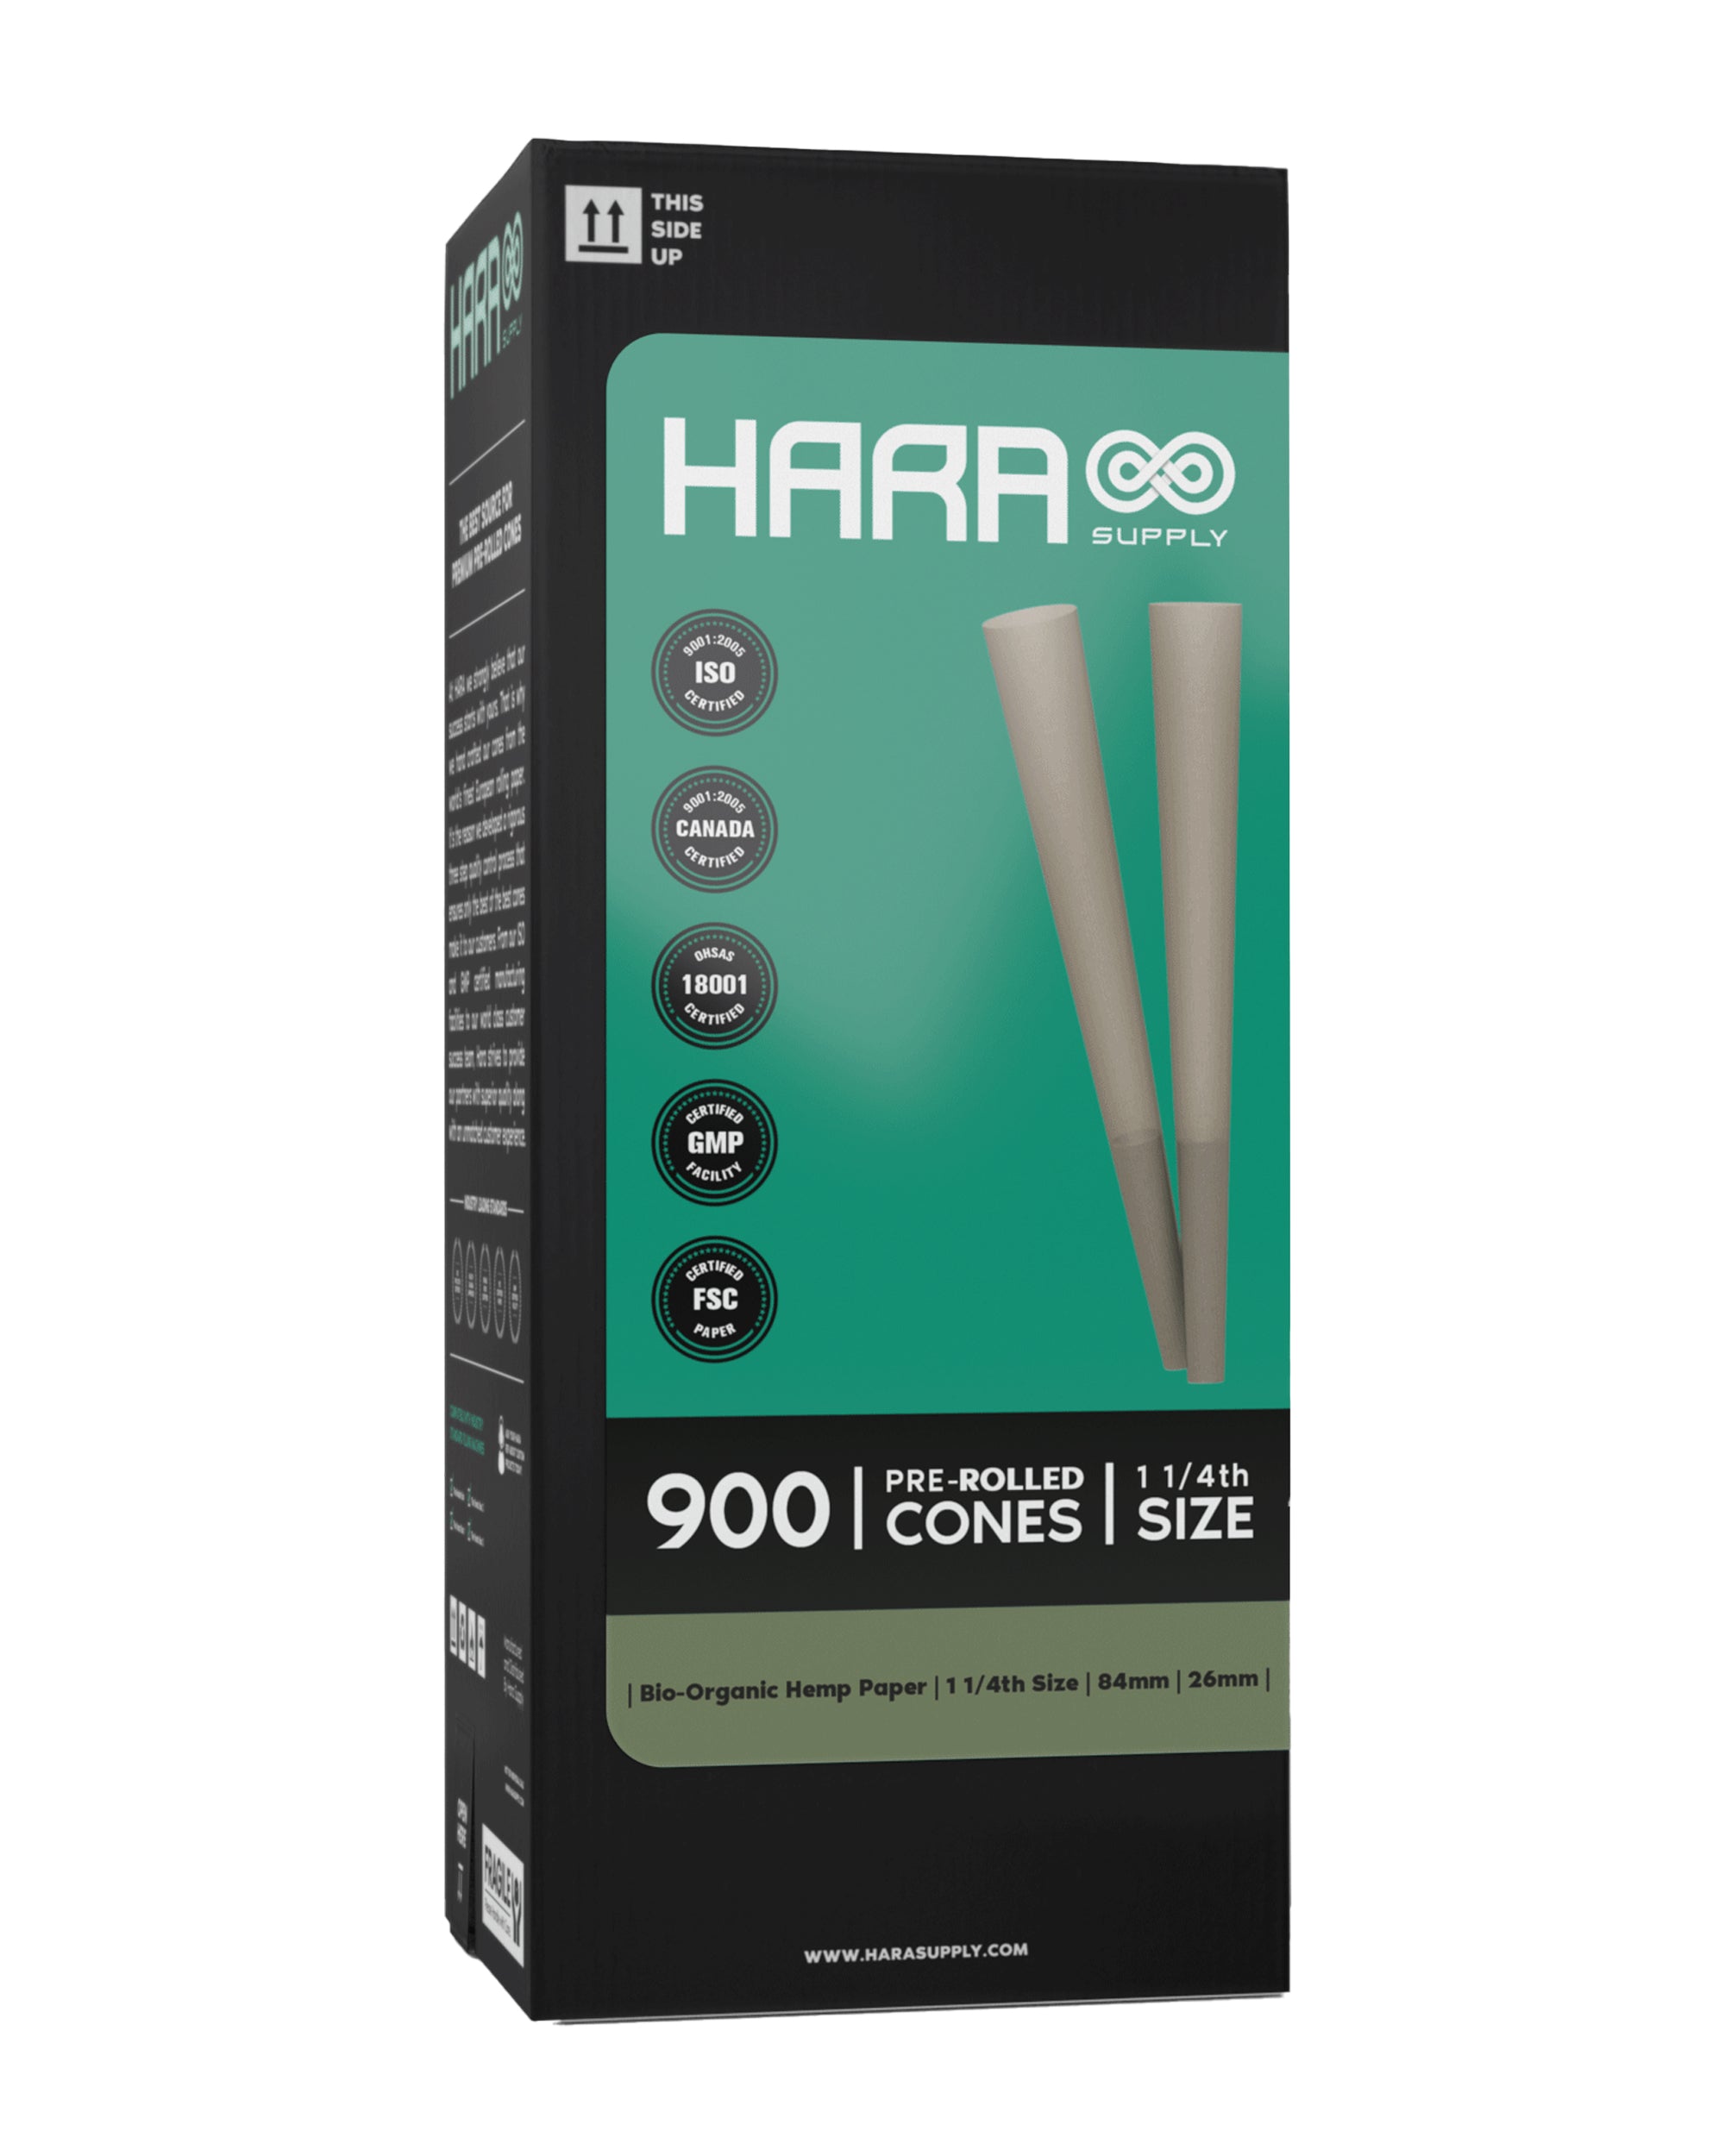 Hara Supply | 1 1/4 Size Pre-Rolled Cones w/ Filter Tip | 84mm - Organic Hemp - 900 Count